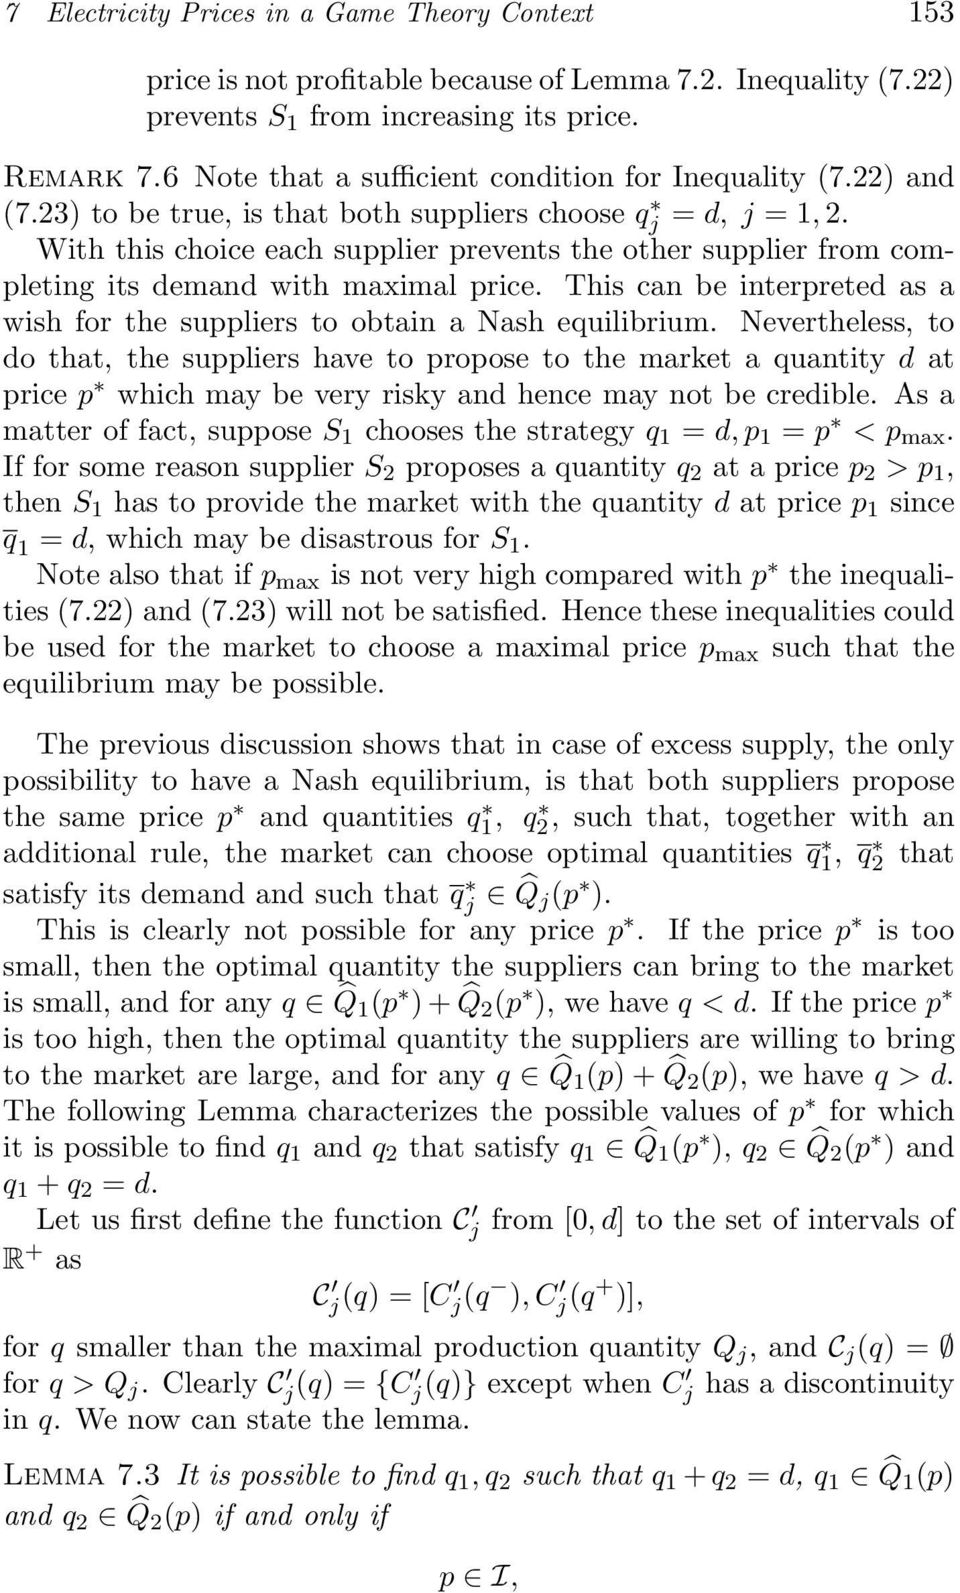 With this choice each supplier prevents the other supplier from completing its demand with maximal price. This can be interpreted as a wish for the suppliers to obtain a Nash equilibrium.